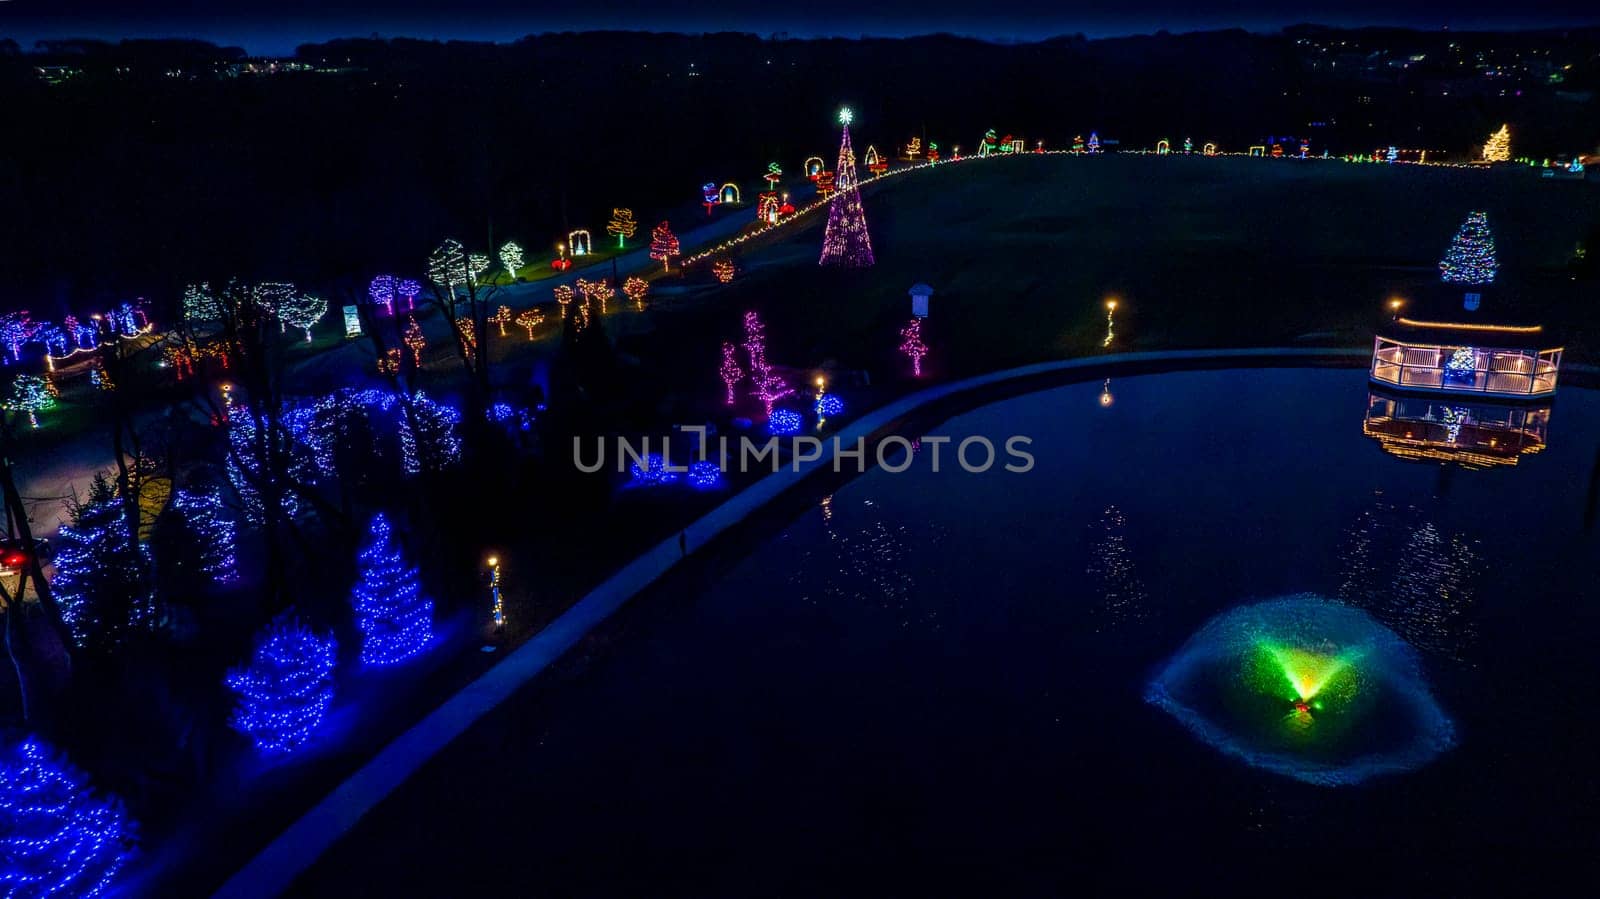 Overhead Nighttime View Of A Serene Pond With A Lit Fountain, Surrounded By A Curved Pathway With Festive Trees In Multicolored Lights.